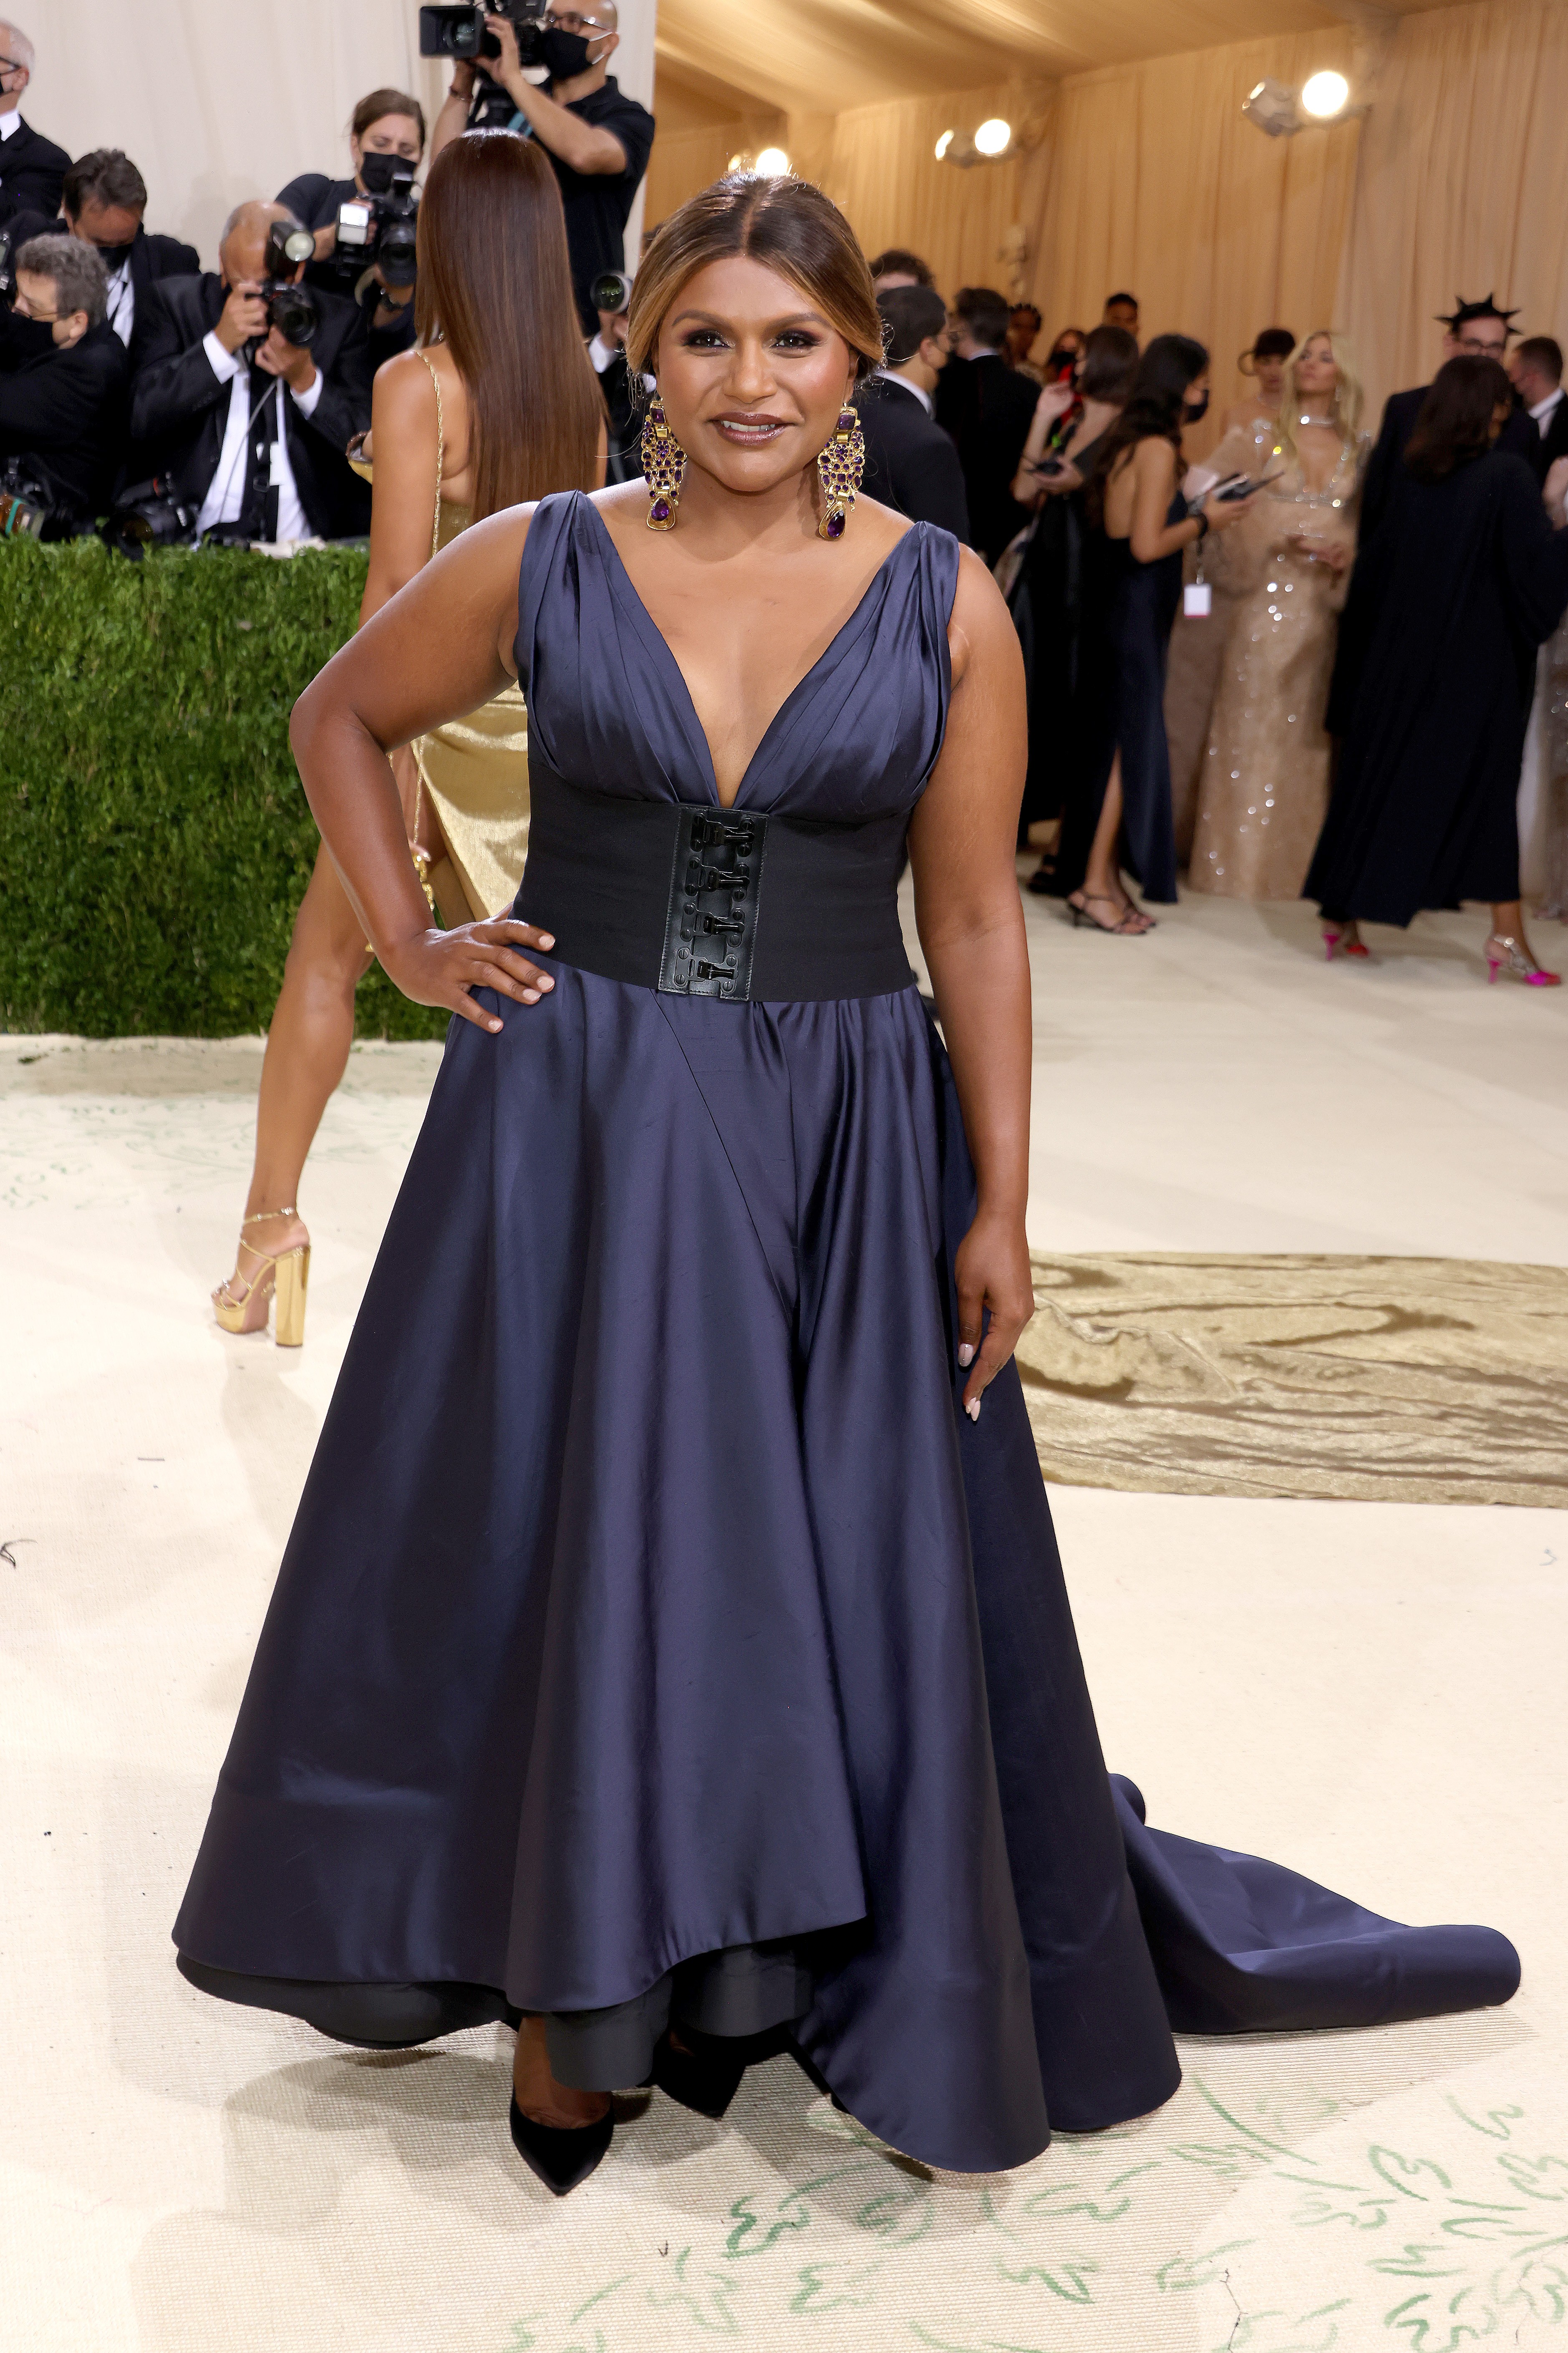 NEW YORK, NEW YORK - SEPTEMBER 13: Mindy Kaling attends The 2021 Met Gala Celebrating In America: A Lexicon Of Fashion at Metropolitan Museum of Art on September 13, 2021 in New York City. (Photo by John Shearer/WireImage) (Foto: WireImage)